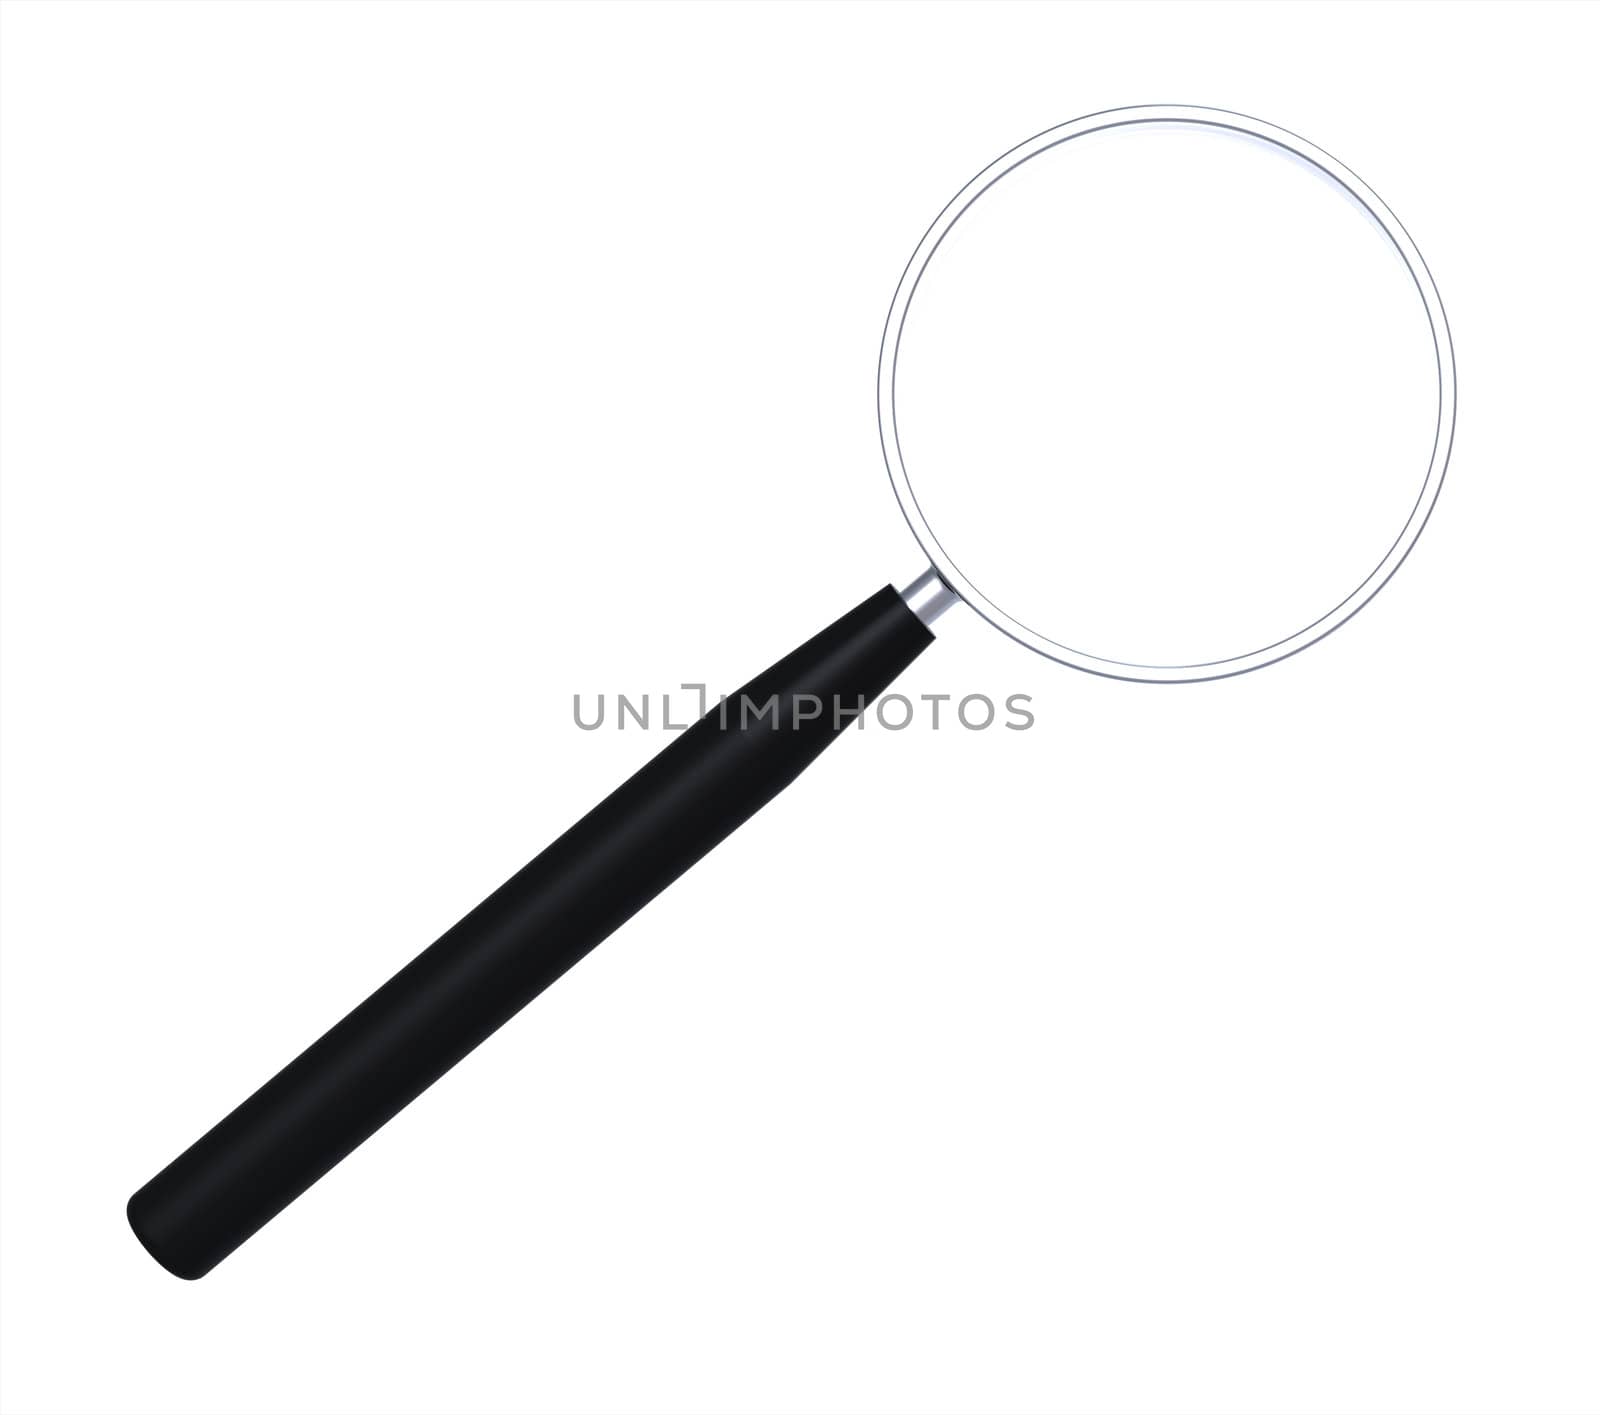 Magnifying glass, 3D render without shadows